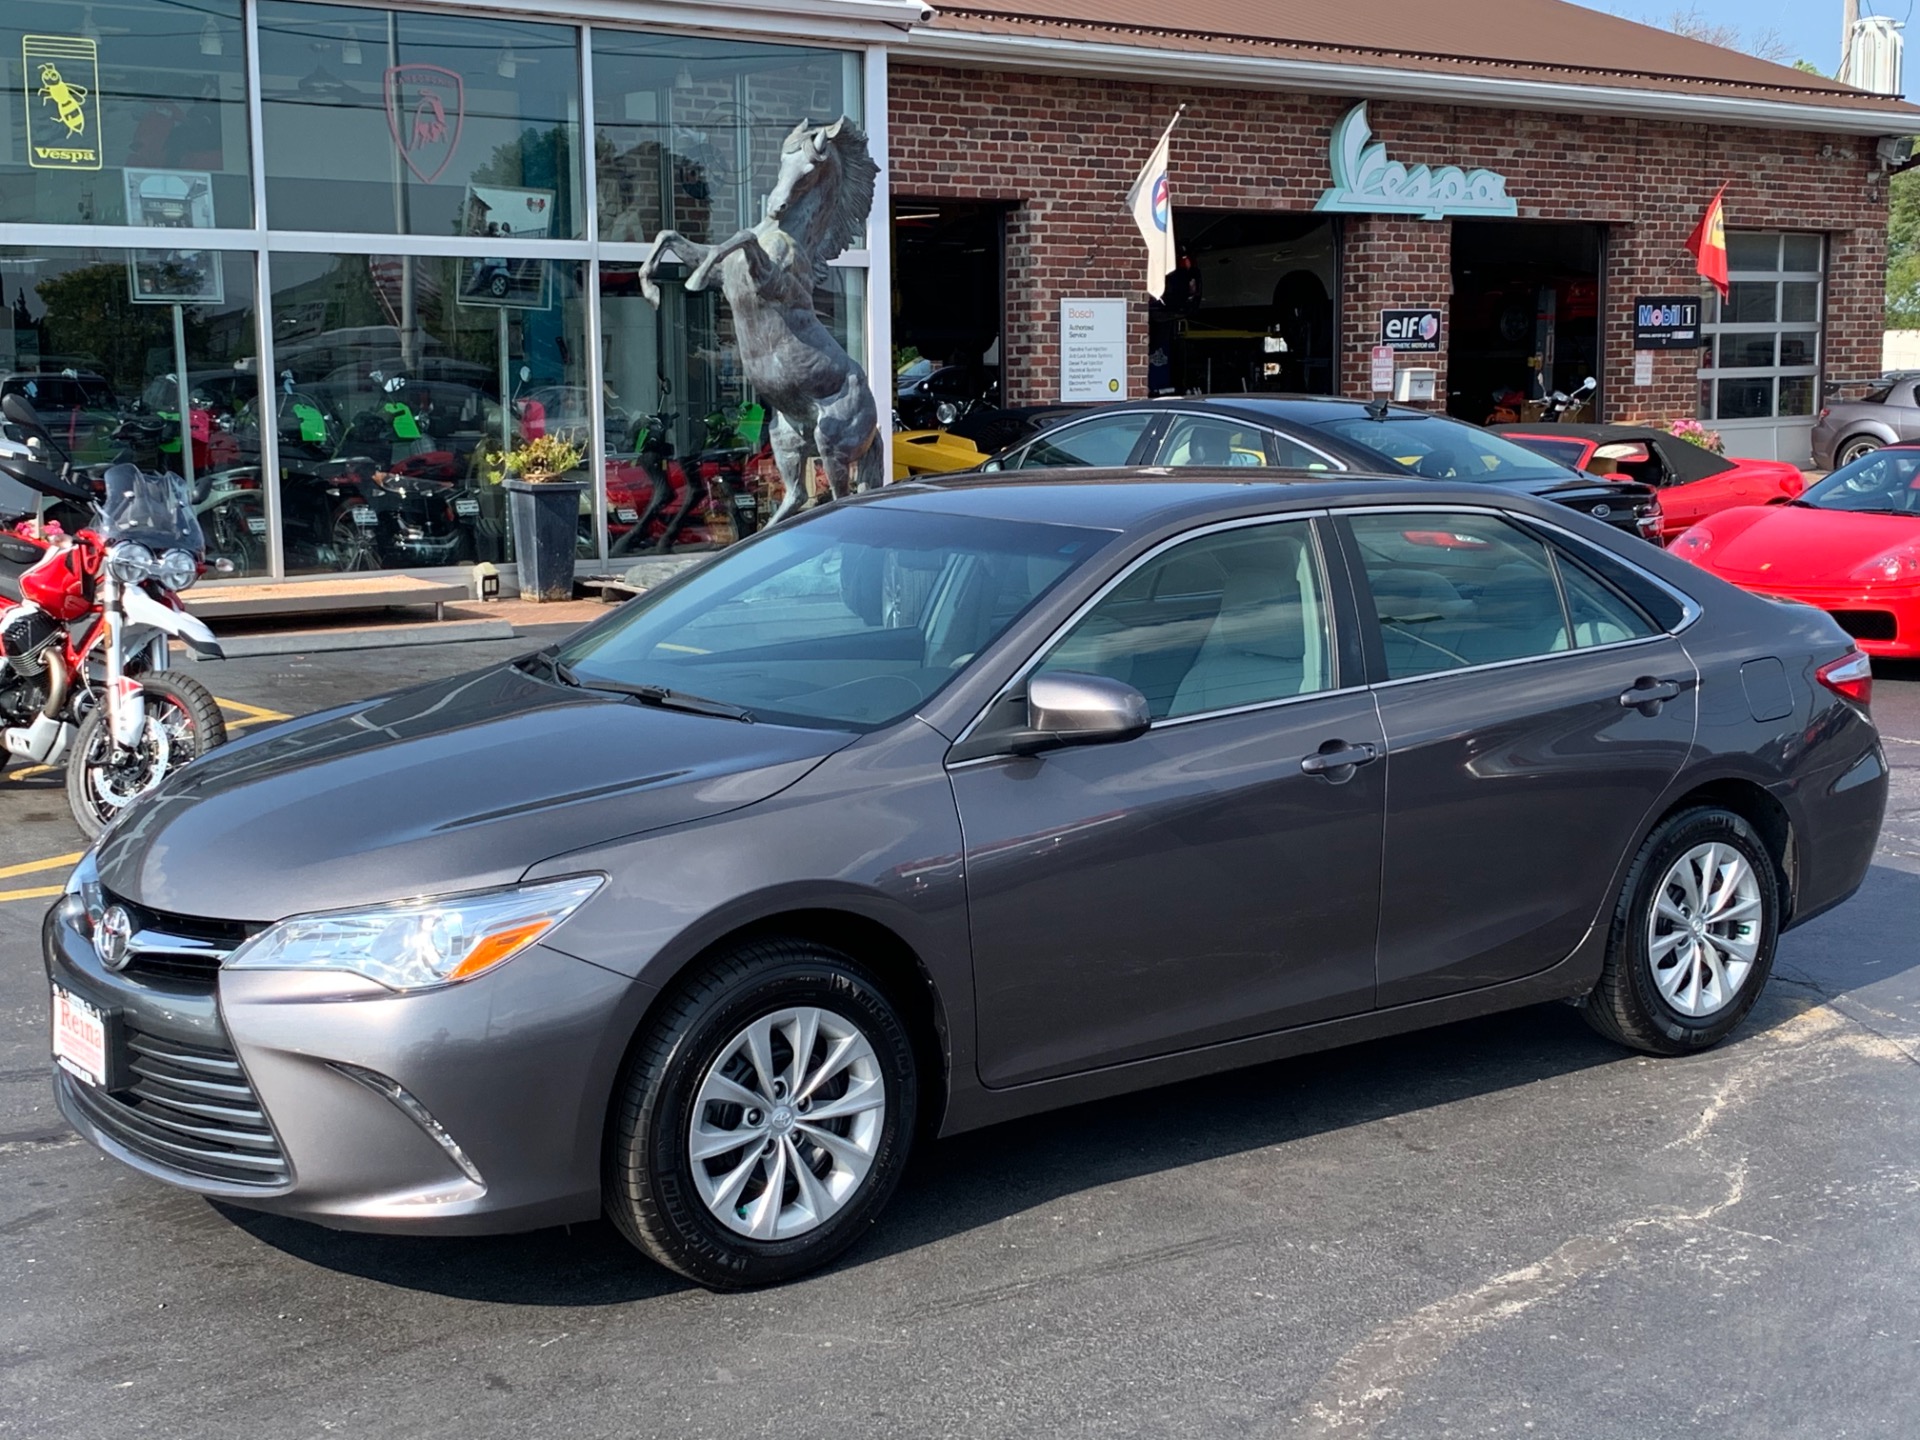 2017 Toyota Camry LE Stock # 9744 for sale near Brookfield, WI | WI ...